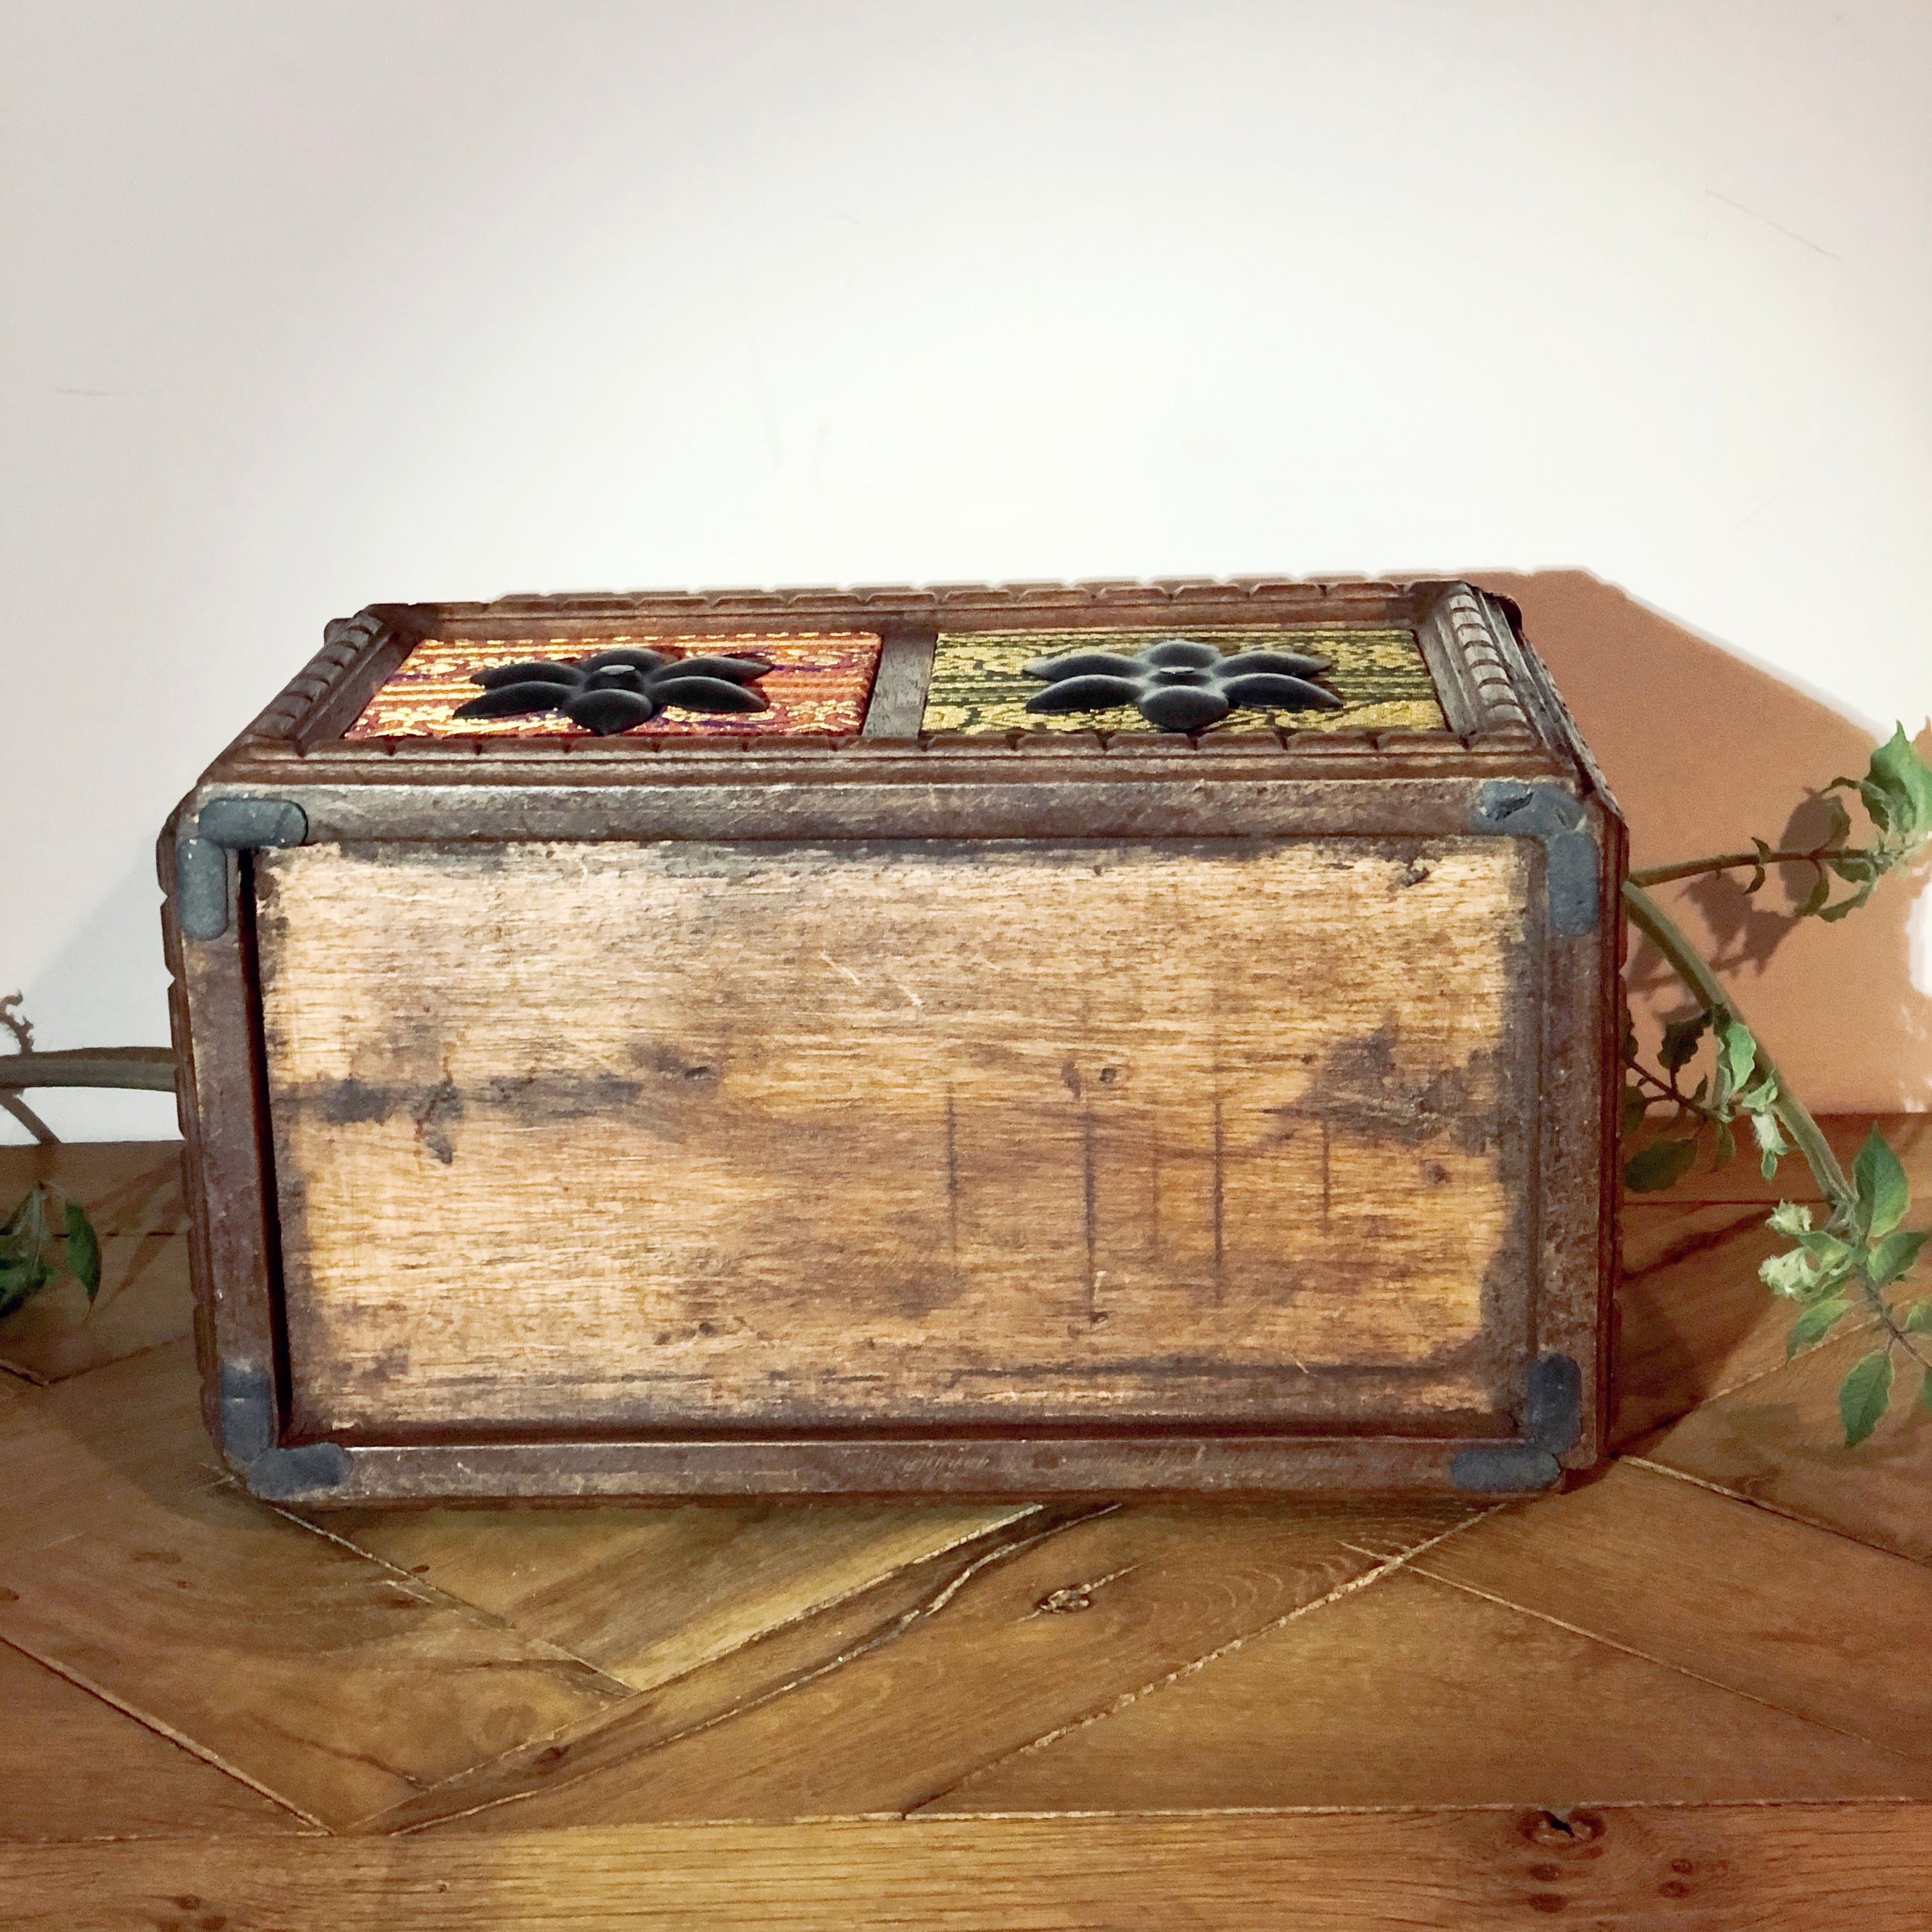 Antique Wooden Multi Drawer Chest | Jewelry Box